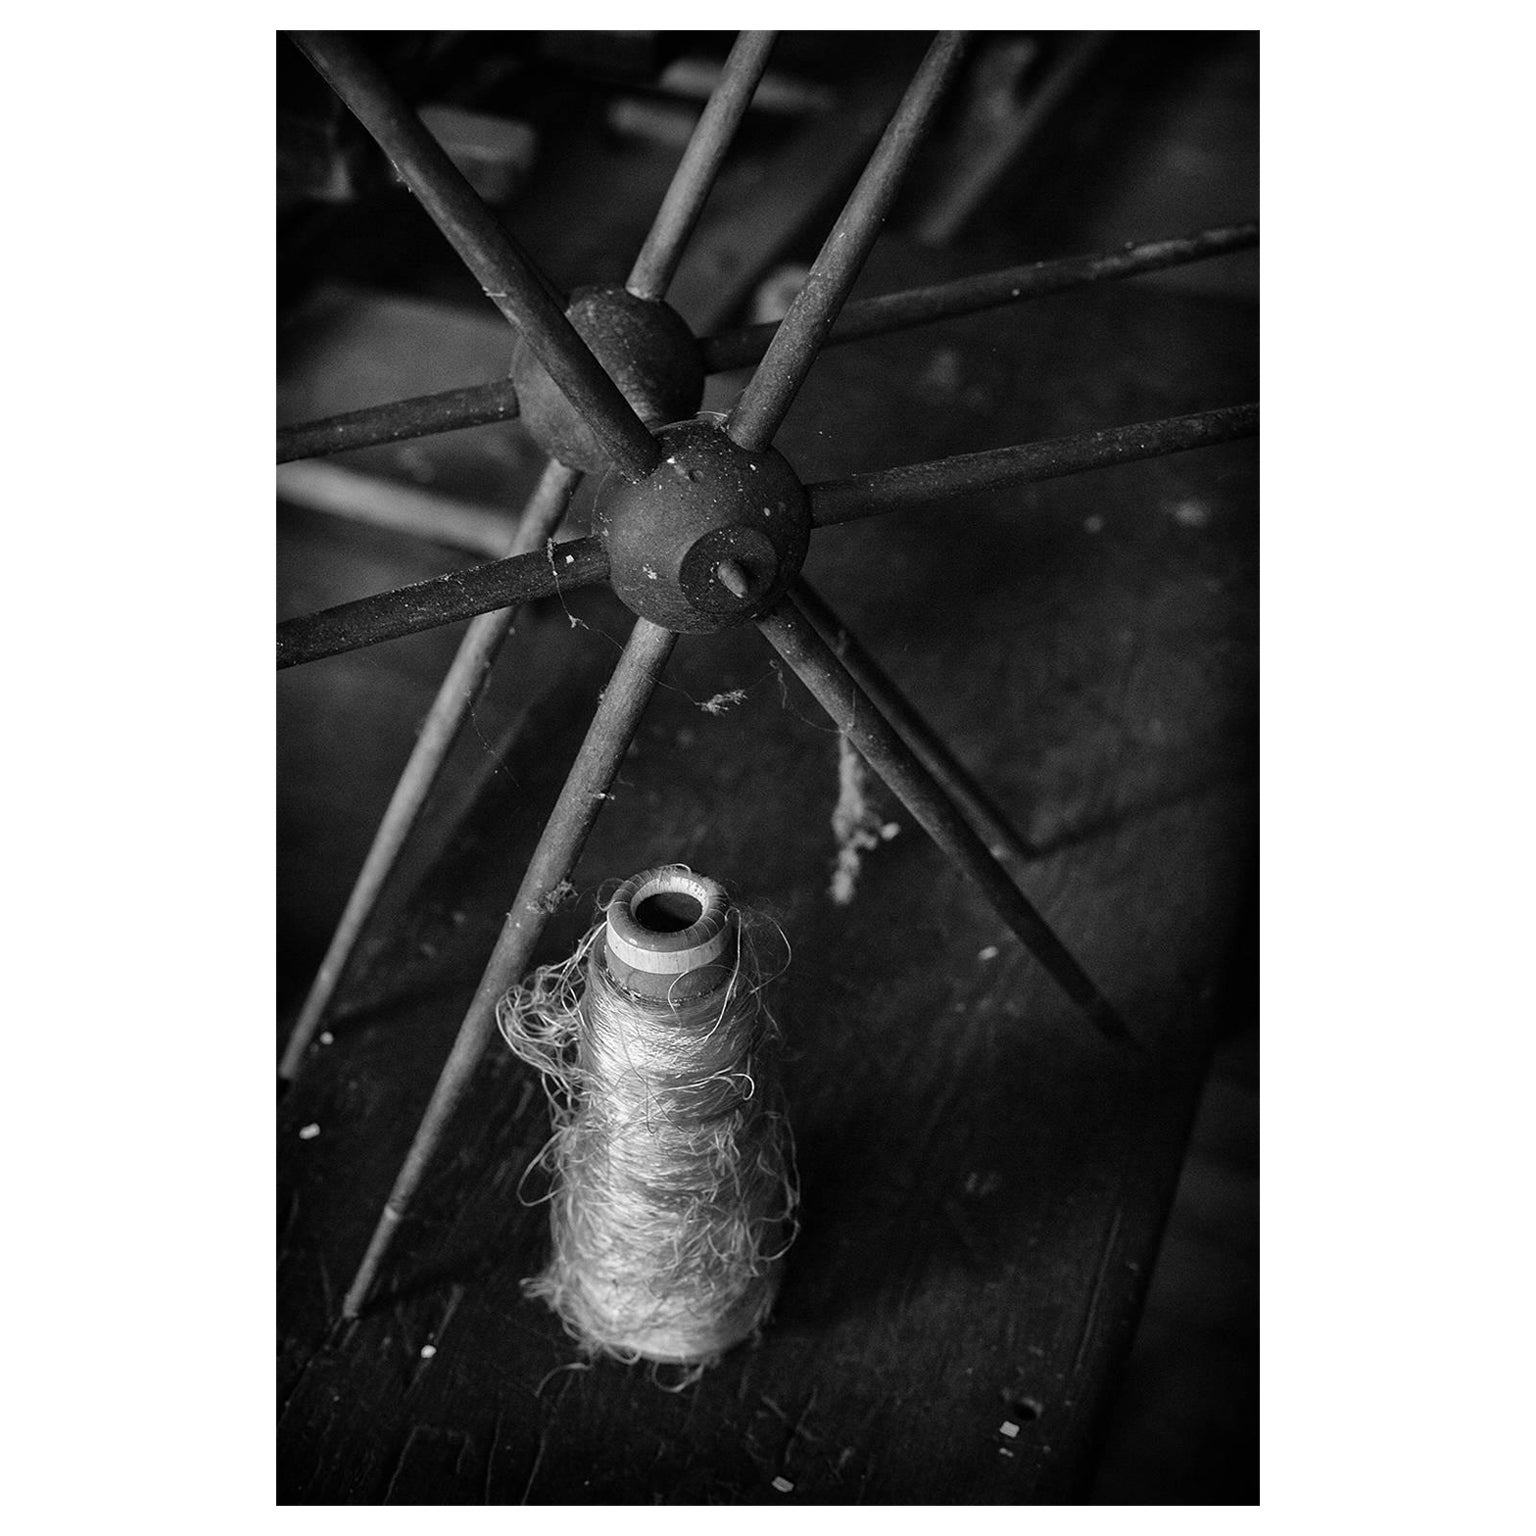 "Thread", black and white, abandoned, silk mill, industrial, vintage, photograph